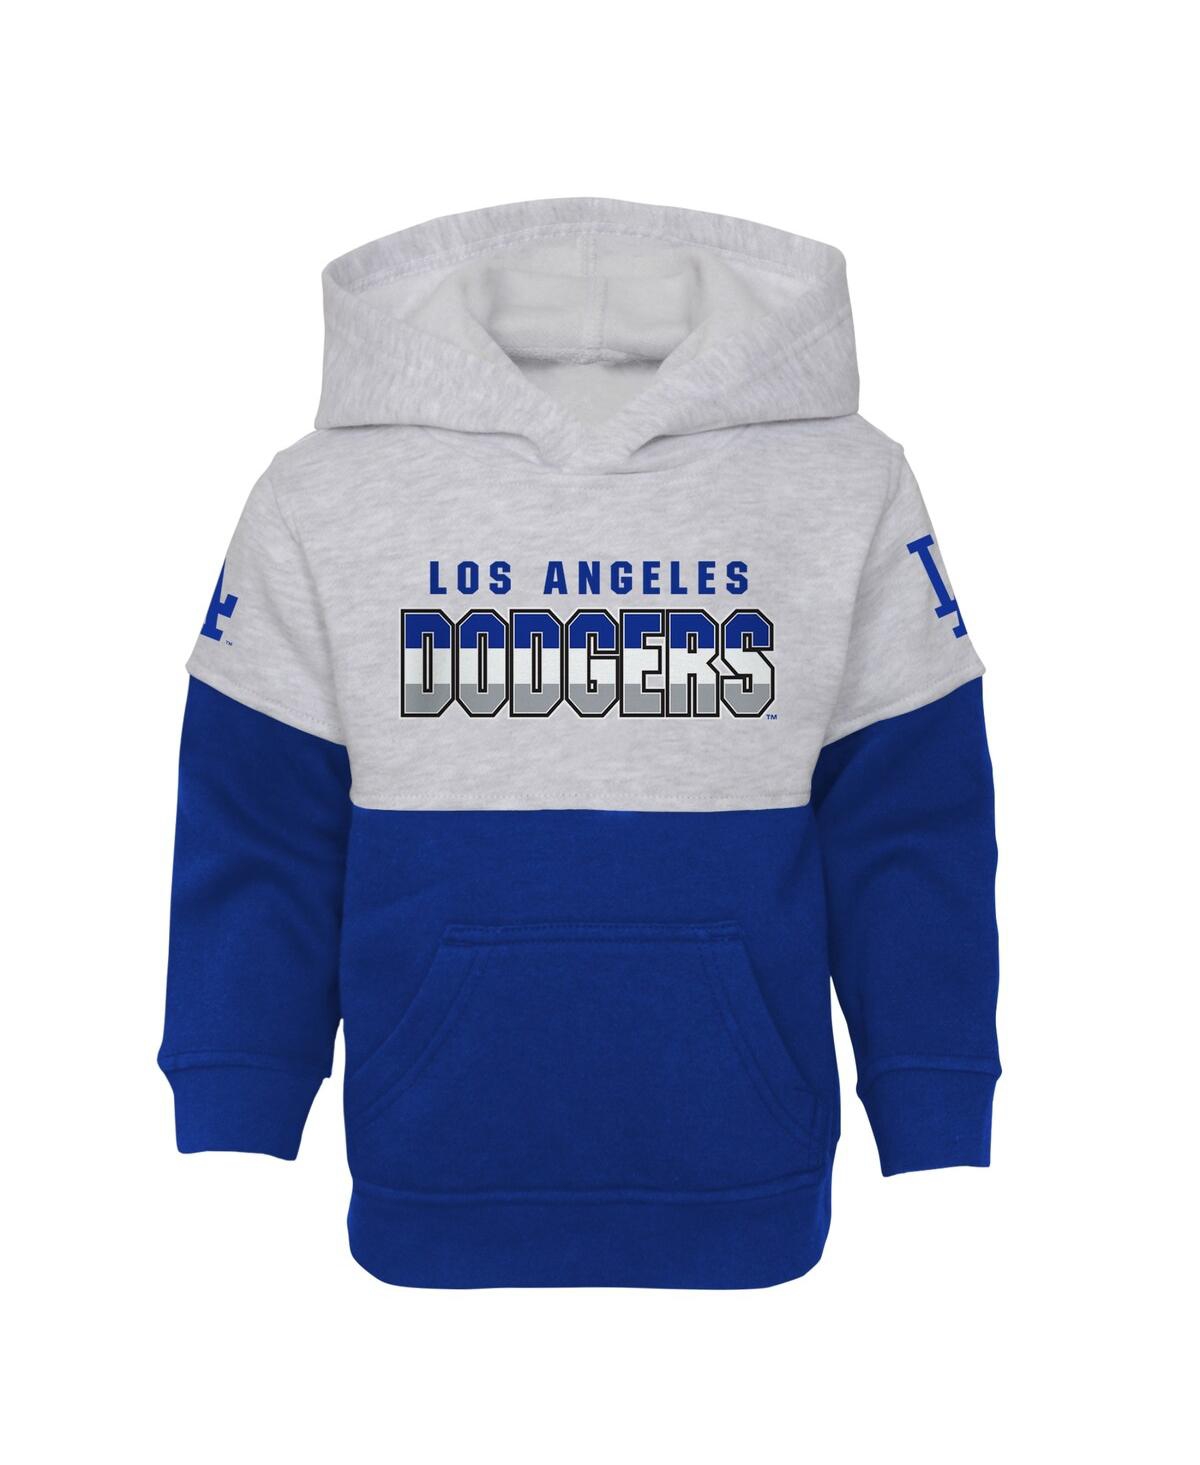 Shop Outerstuff Infant Boys And Girls Royal, Heather Gray Los Angeles Dodgers Playmaker Pullover Hoodie And Pants Se In Royal,heather Gray